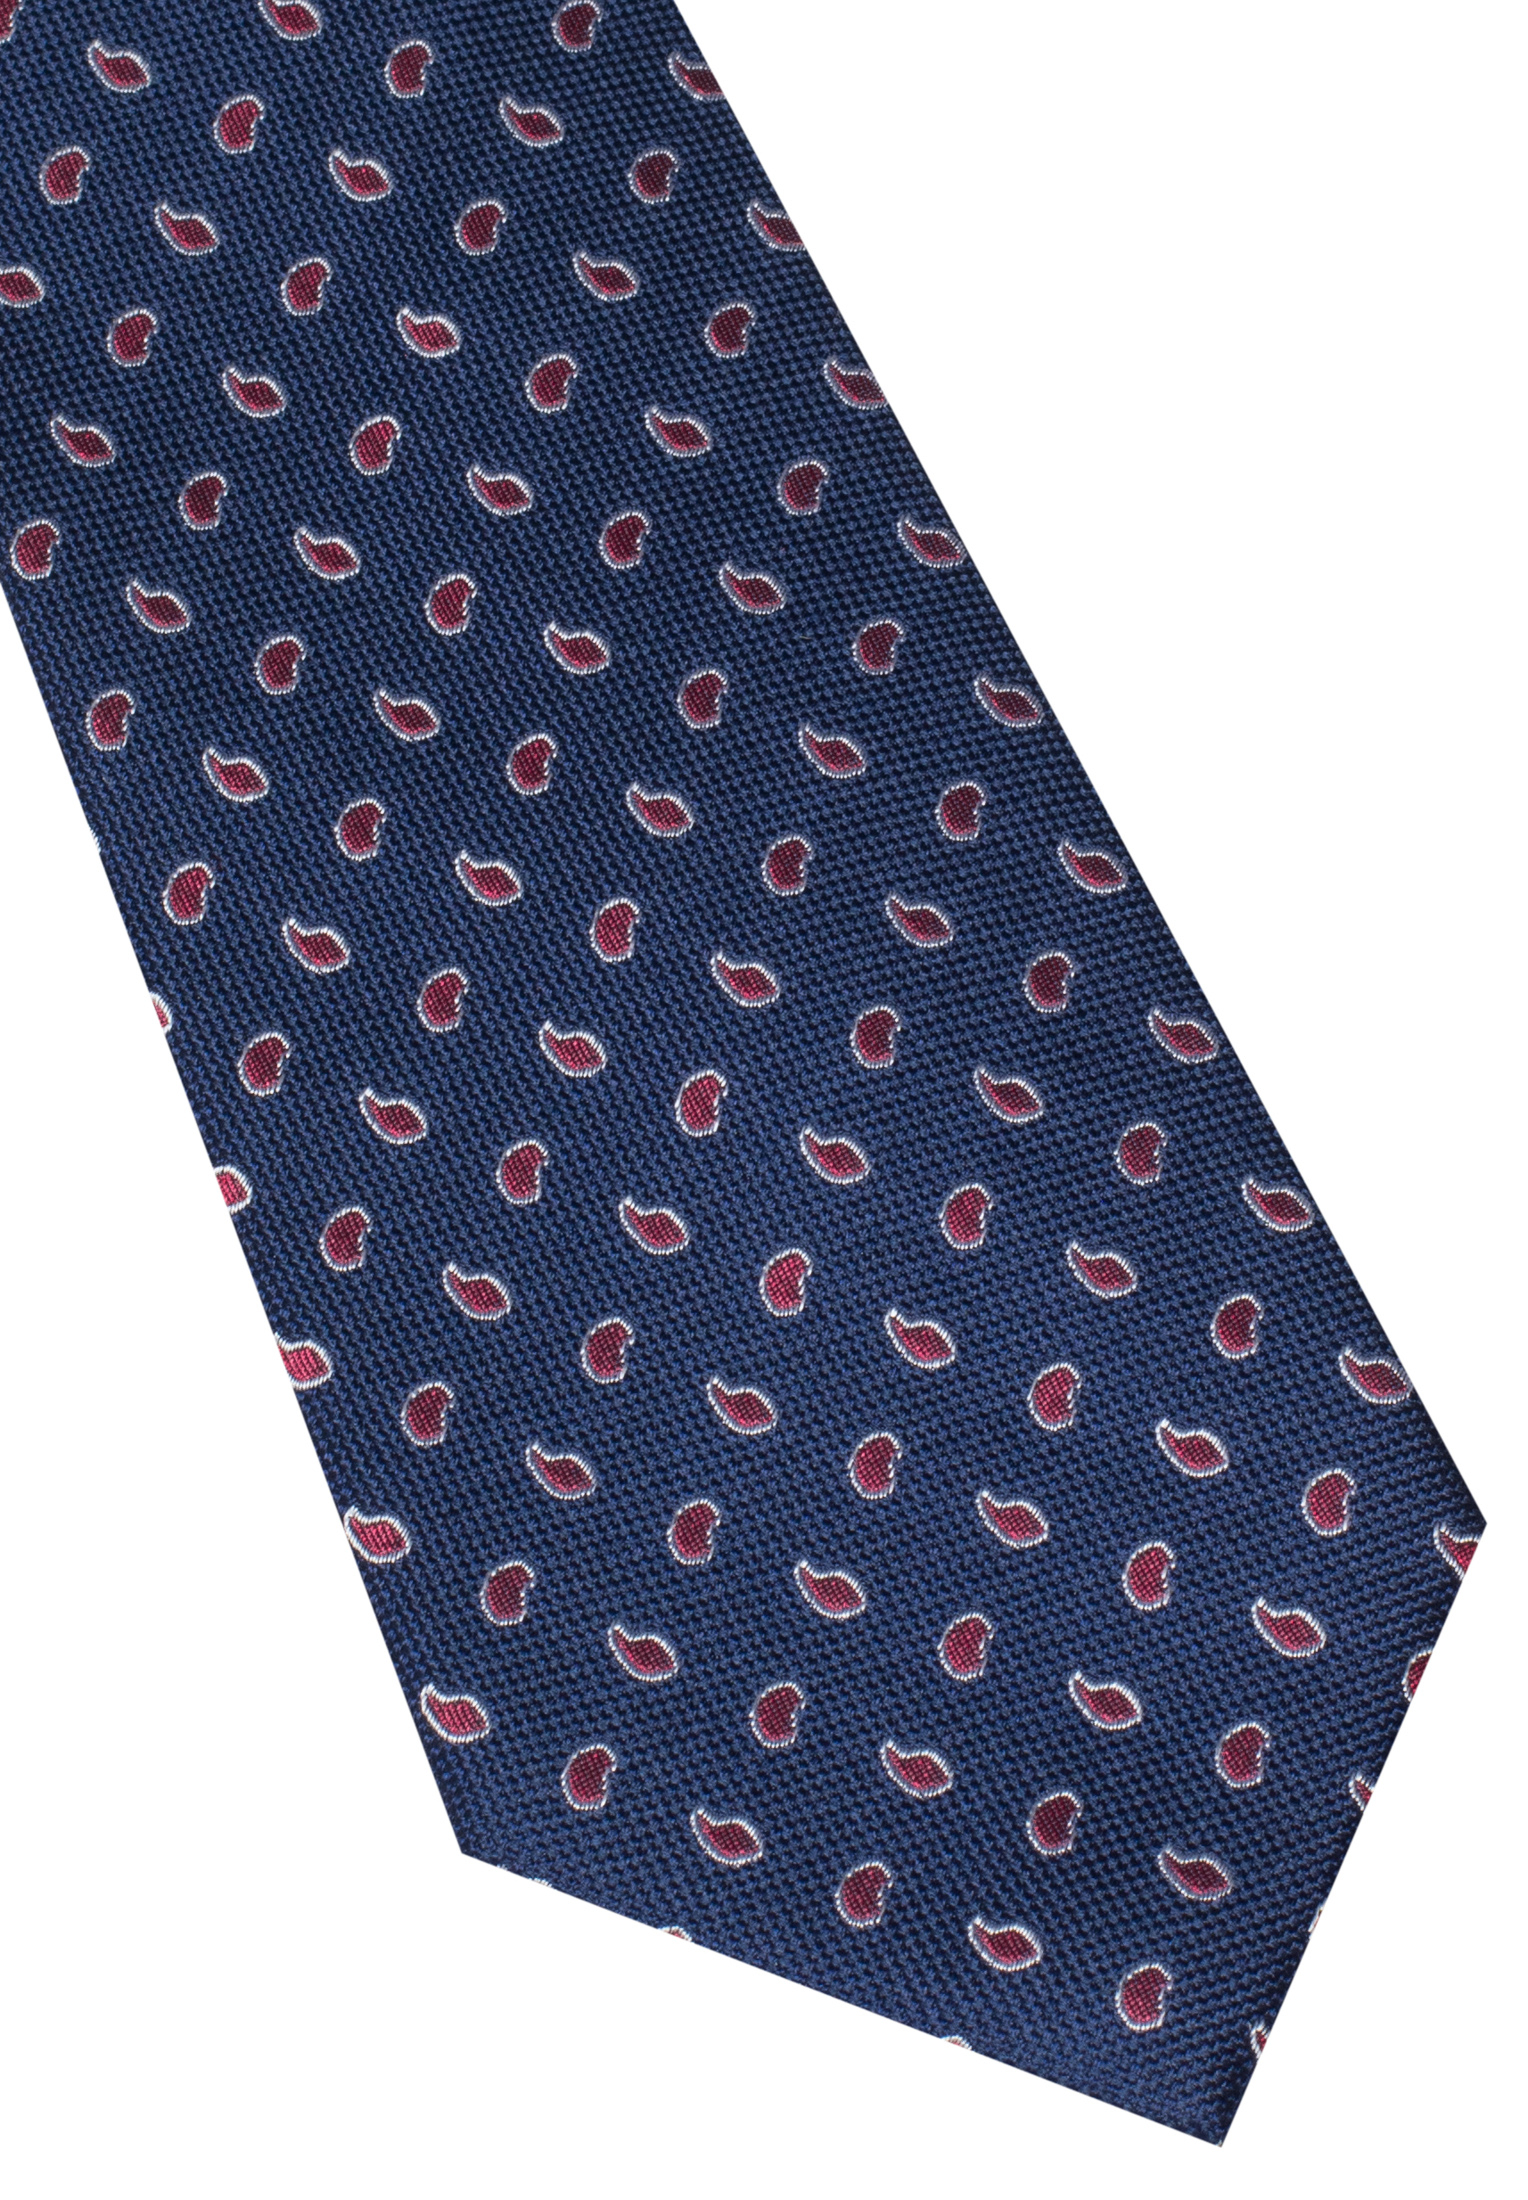 Tie in navy/red patterned